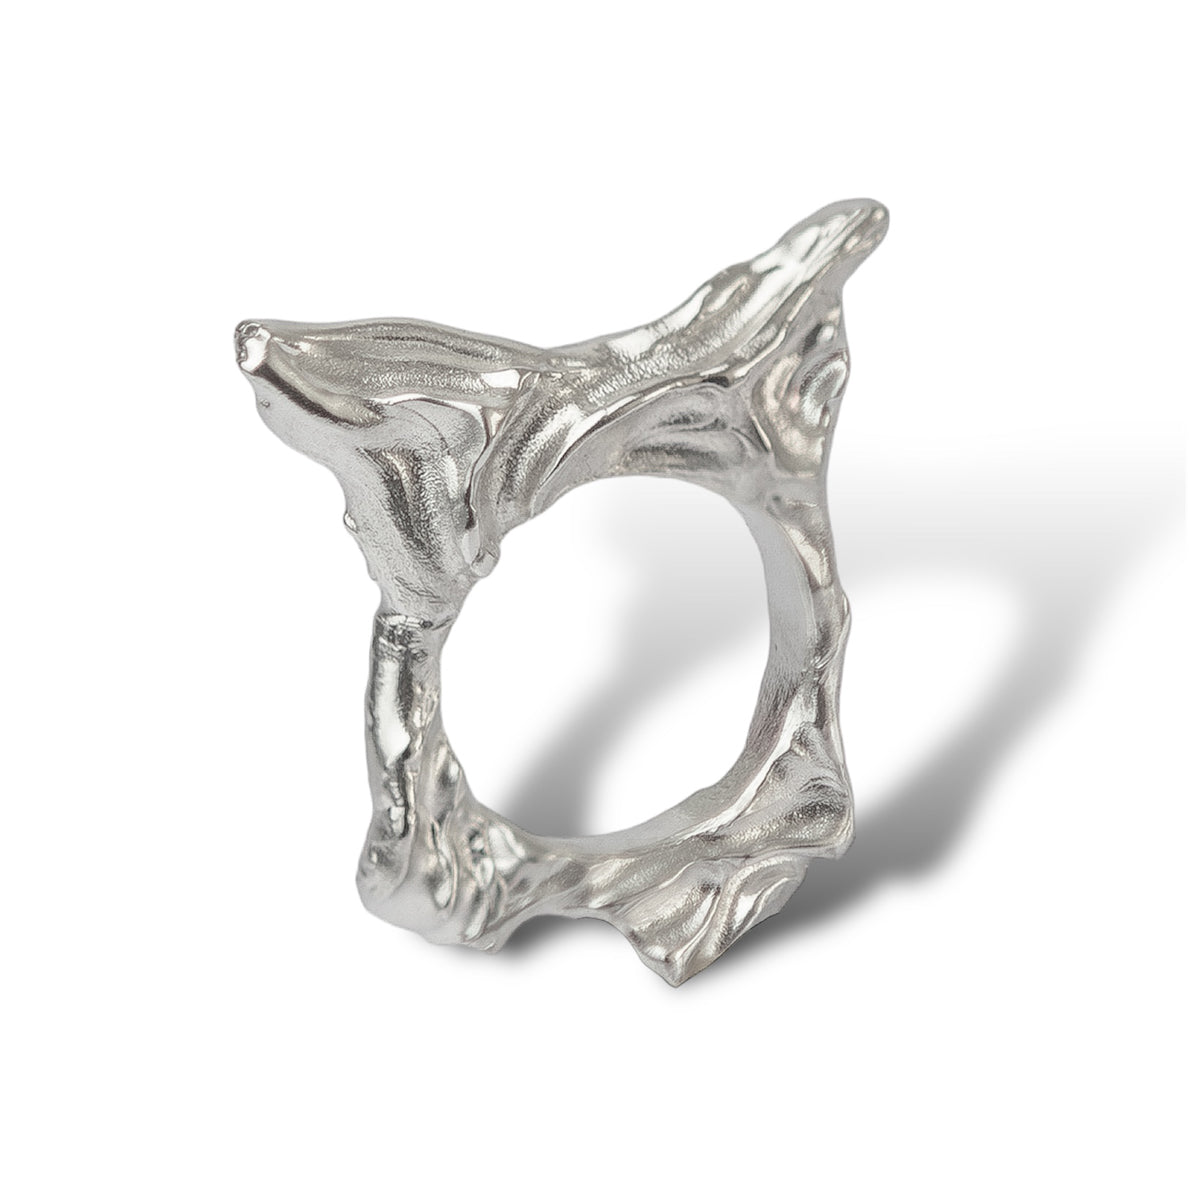 One-of-a-kind asymmetrical massive ring